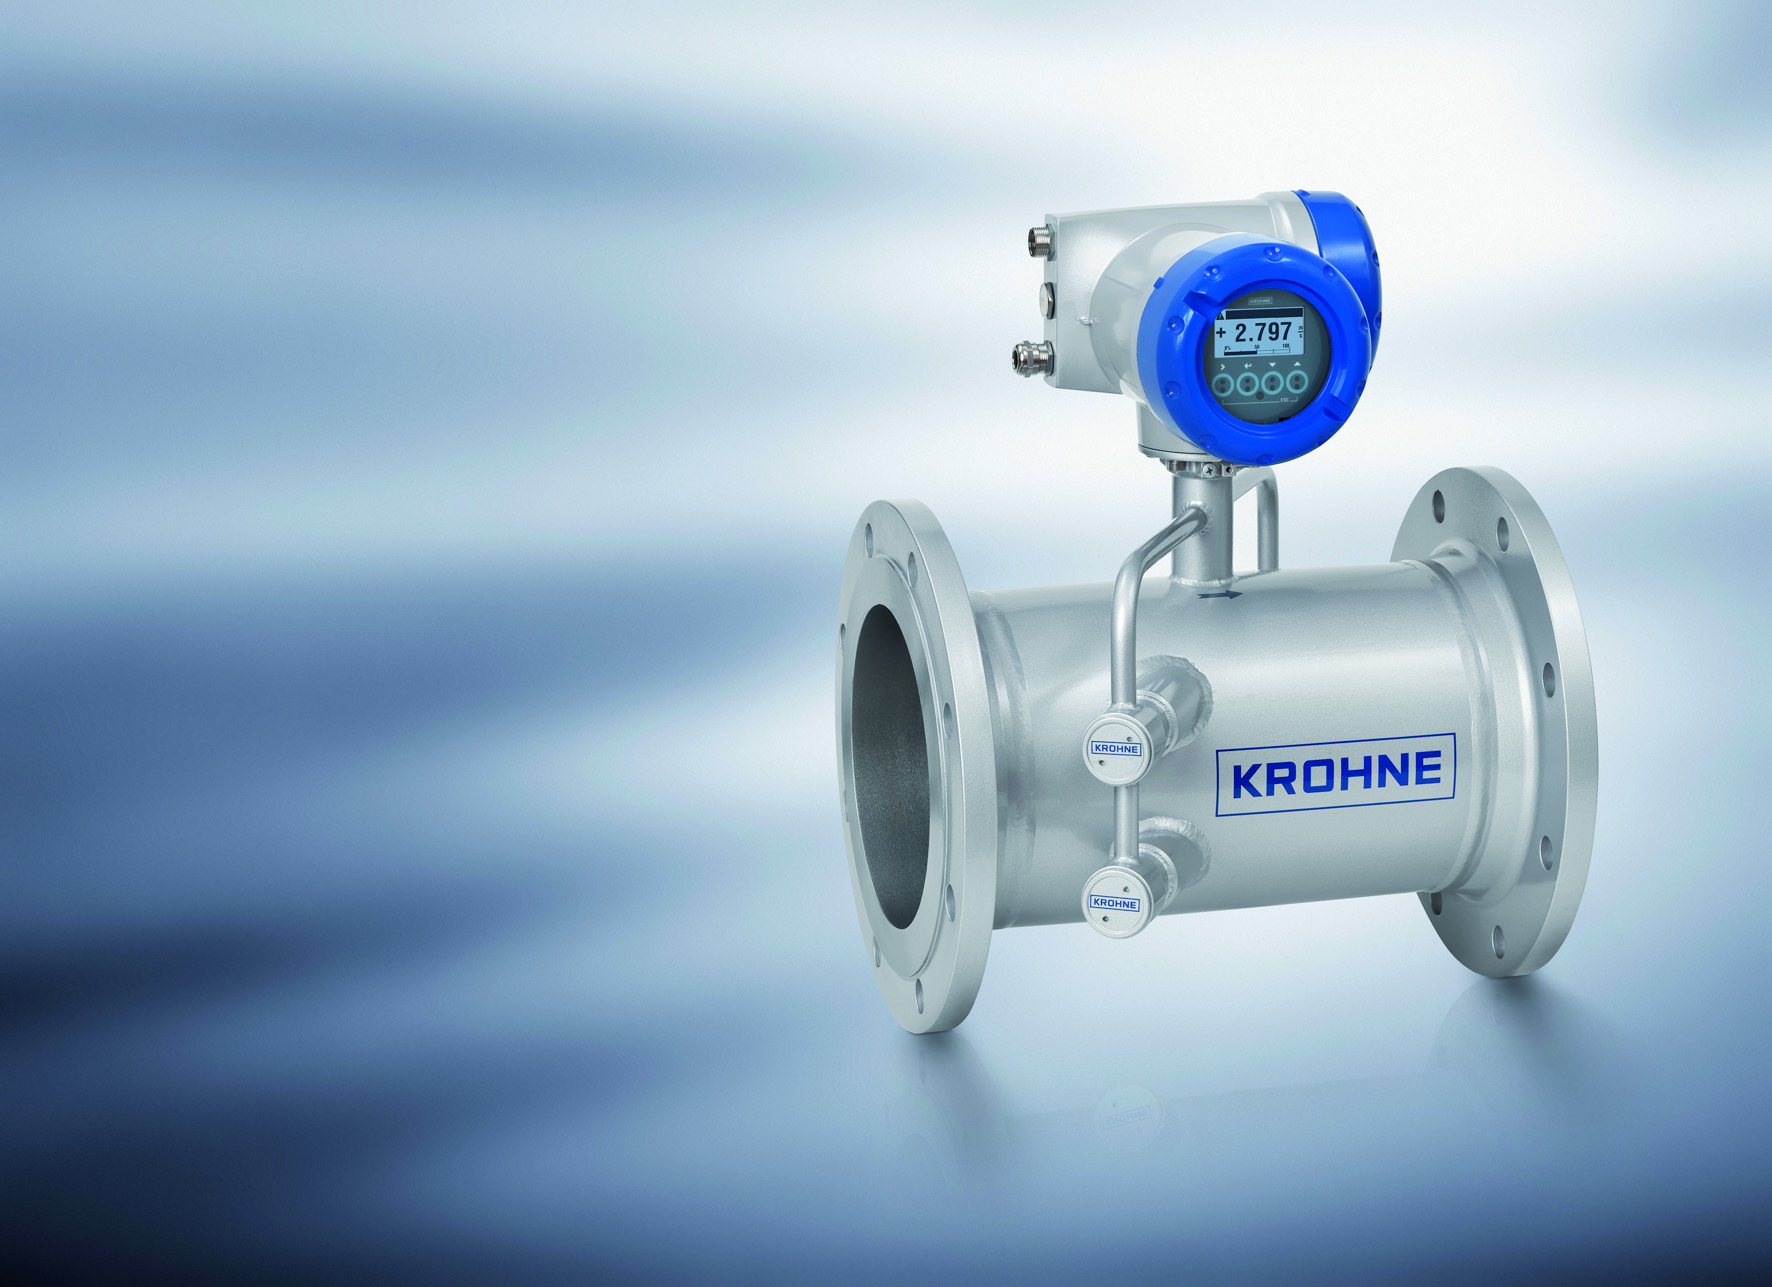 Krohne’s Optisonic 7300 for methane gas applications, will be on display at WEFTEC 2018.